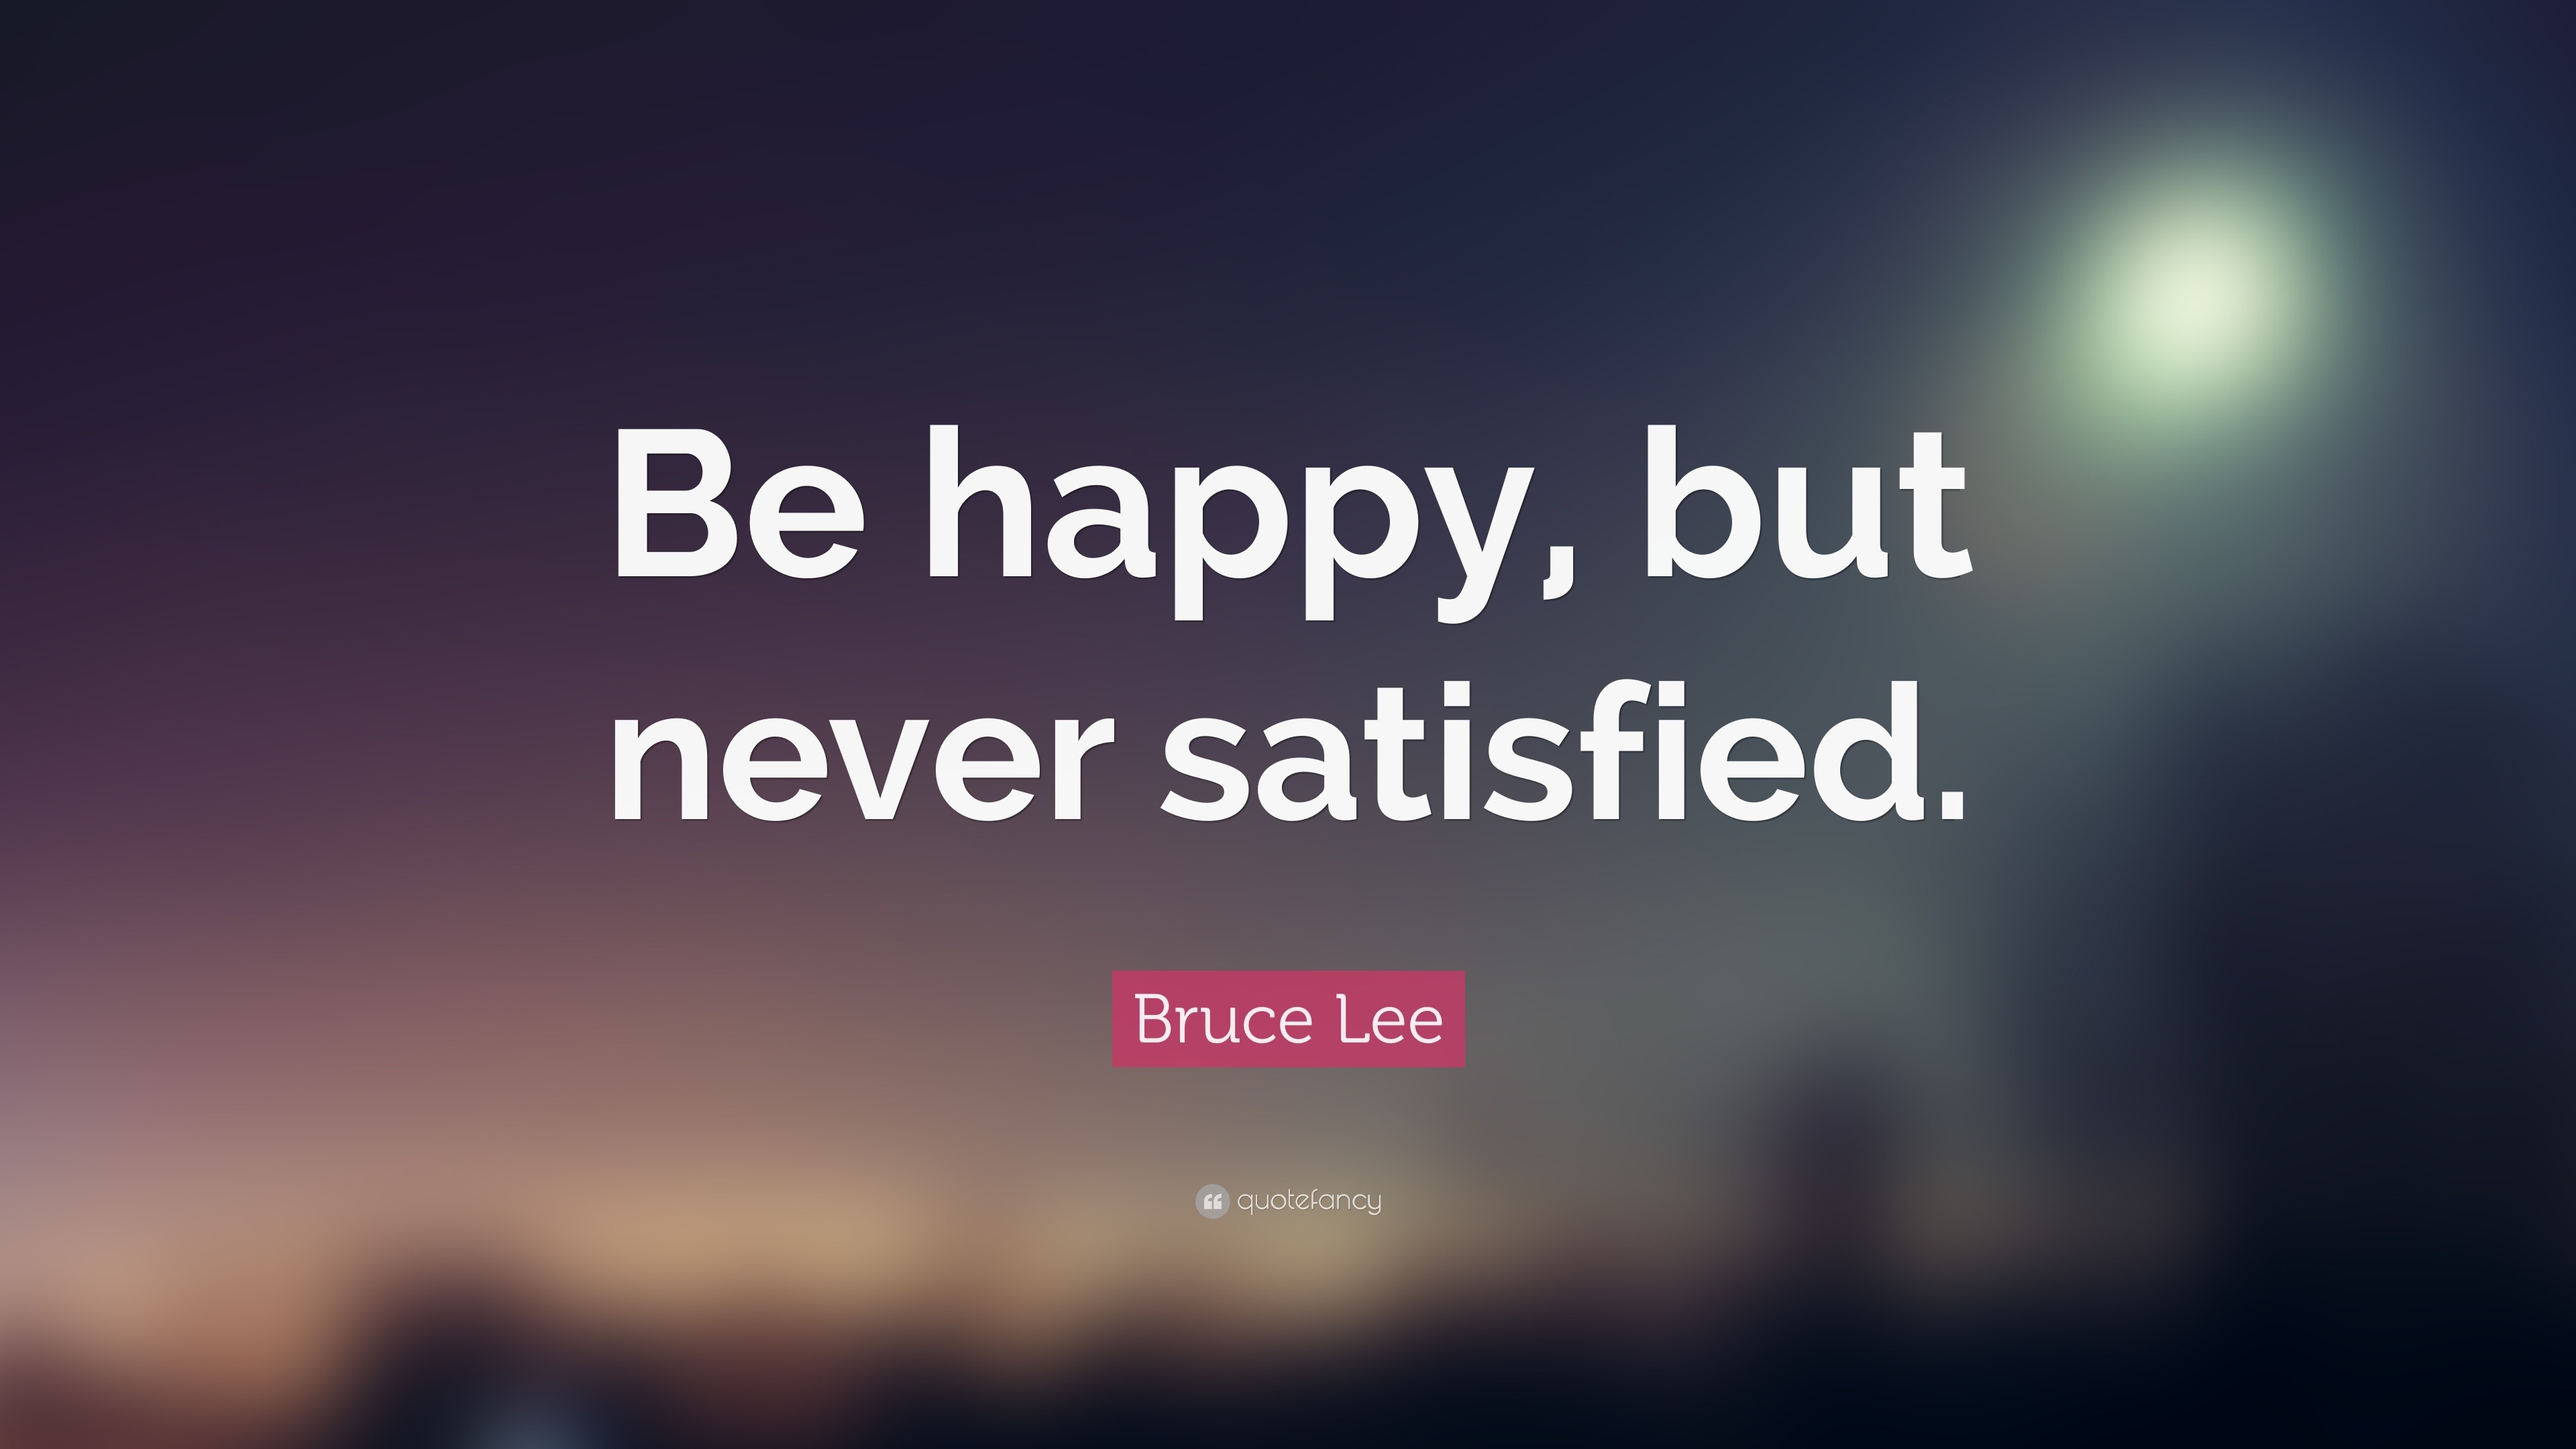 Bruce Lee Quote: “Be happy, but never satisfied.” (22 wallpapers) - Quotefancy3840 x 2160